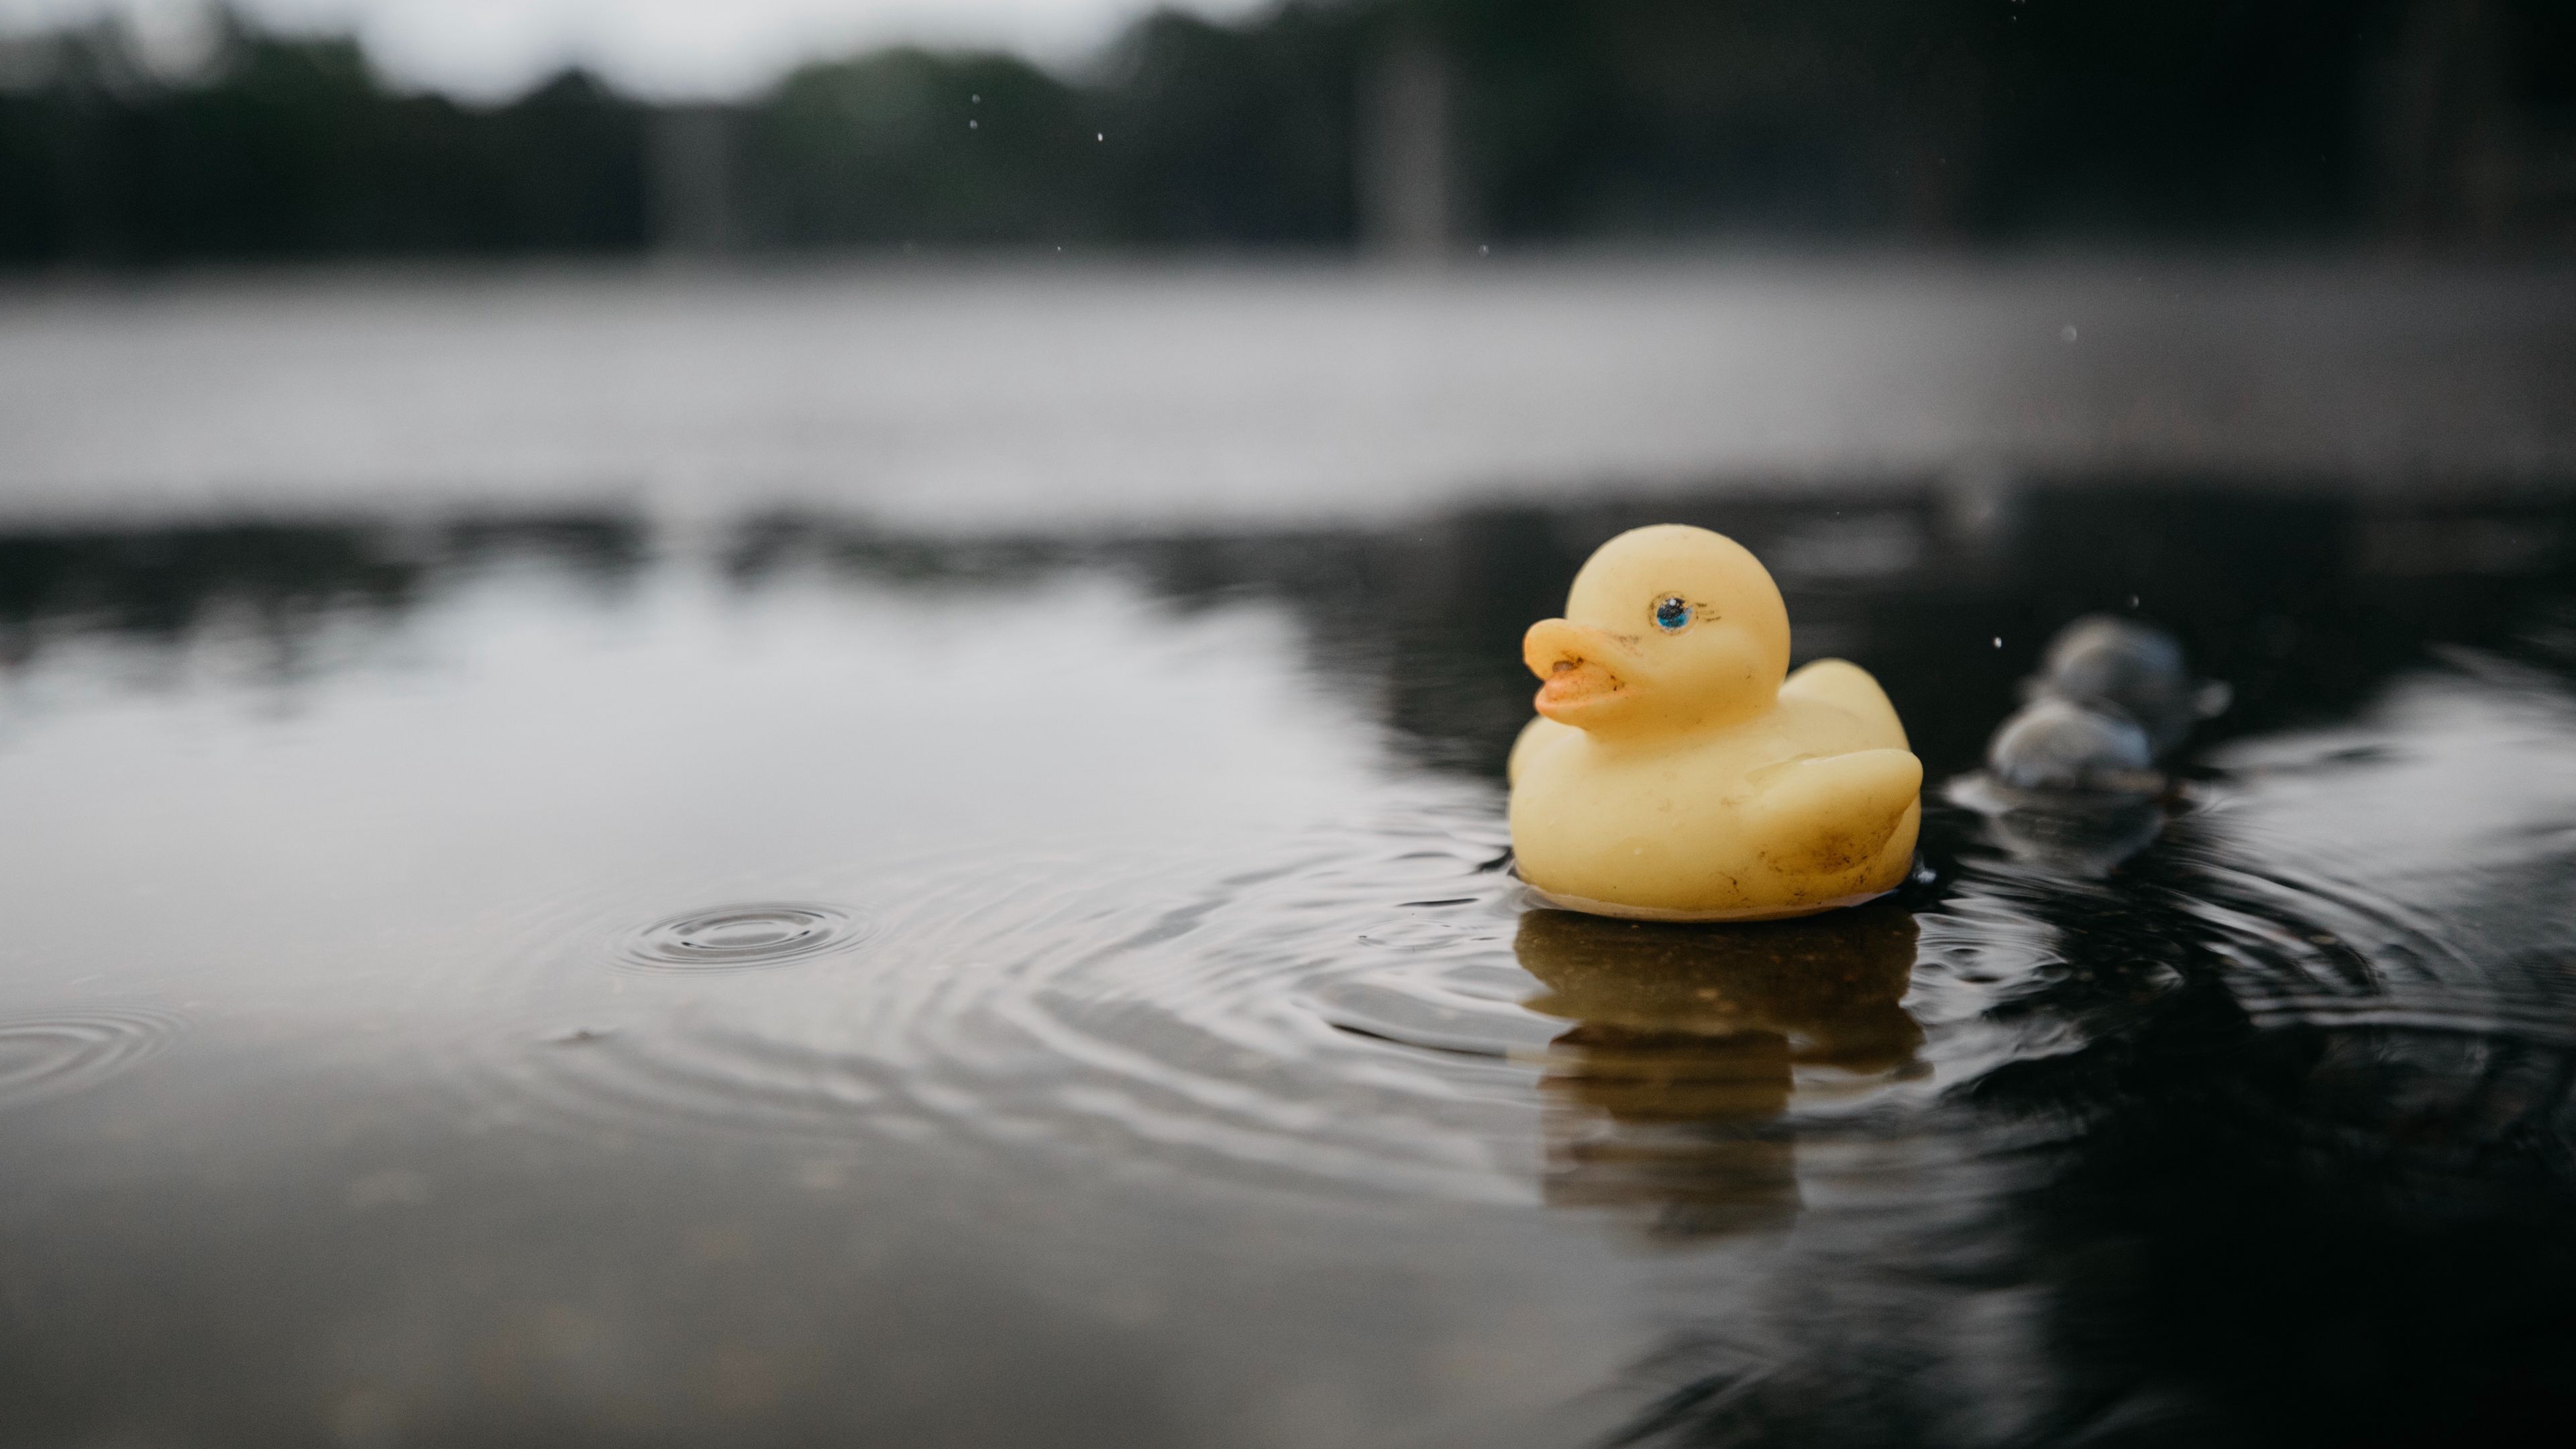 A yellow rubber duck floating on a pond - Duck